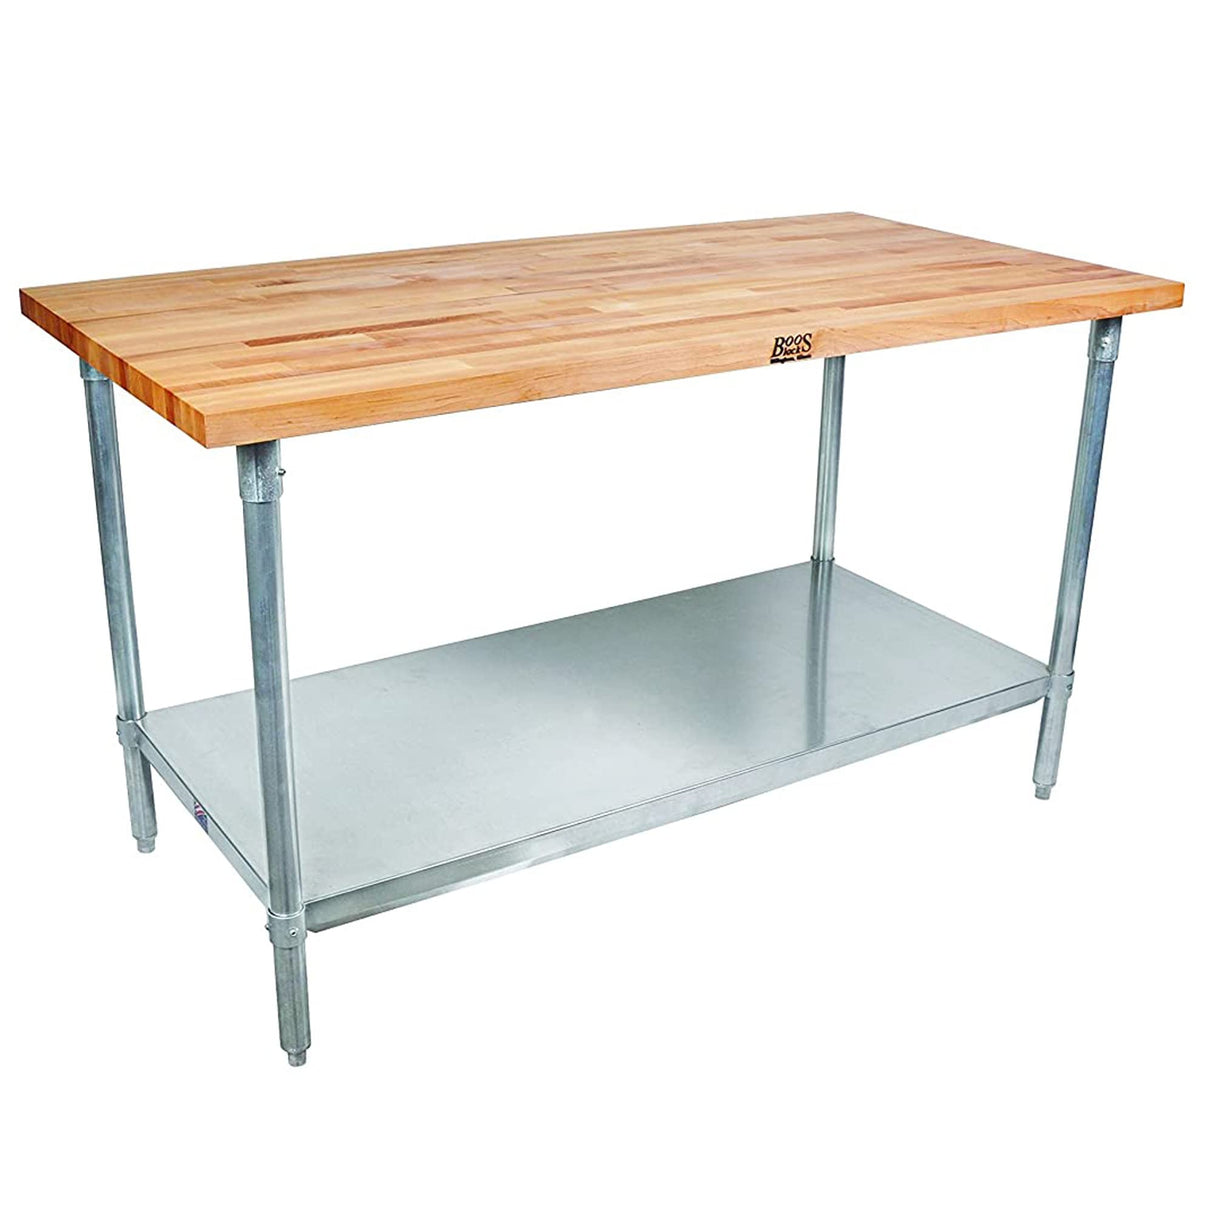 John Boos JNS02 Maple Wood Top Work Table with Adjustable Lower Shelf, 48 x 24 1.5 Inch, Galvanized Steel